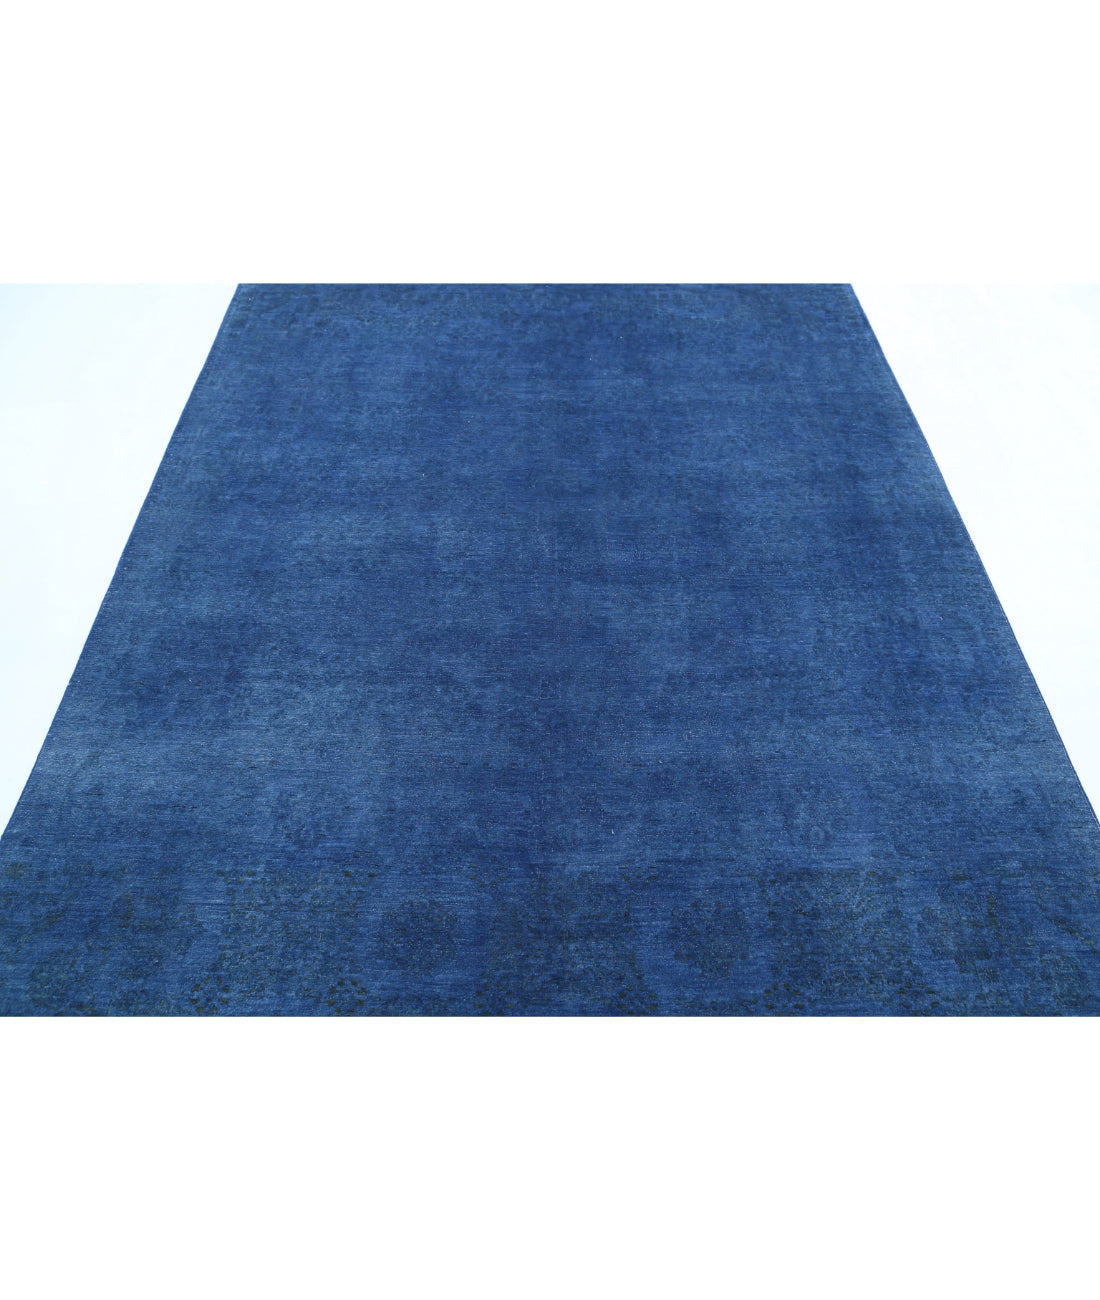 Hand Knotted Overdye Wool Rug - 6'3'' x 8'8'' 6'3'' x 8'8'' (188 X 260) / Blue / Blue